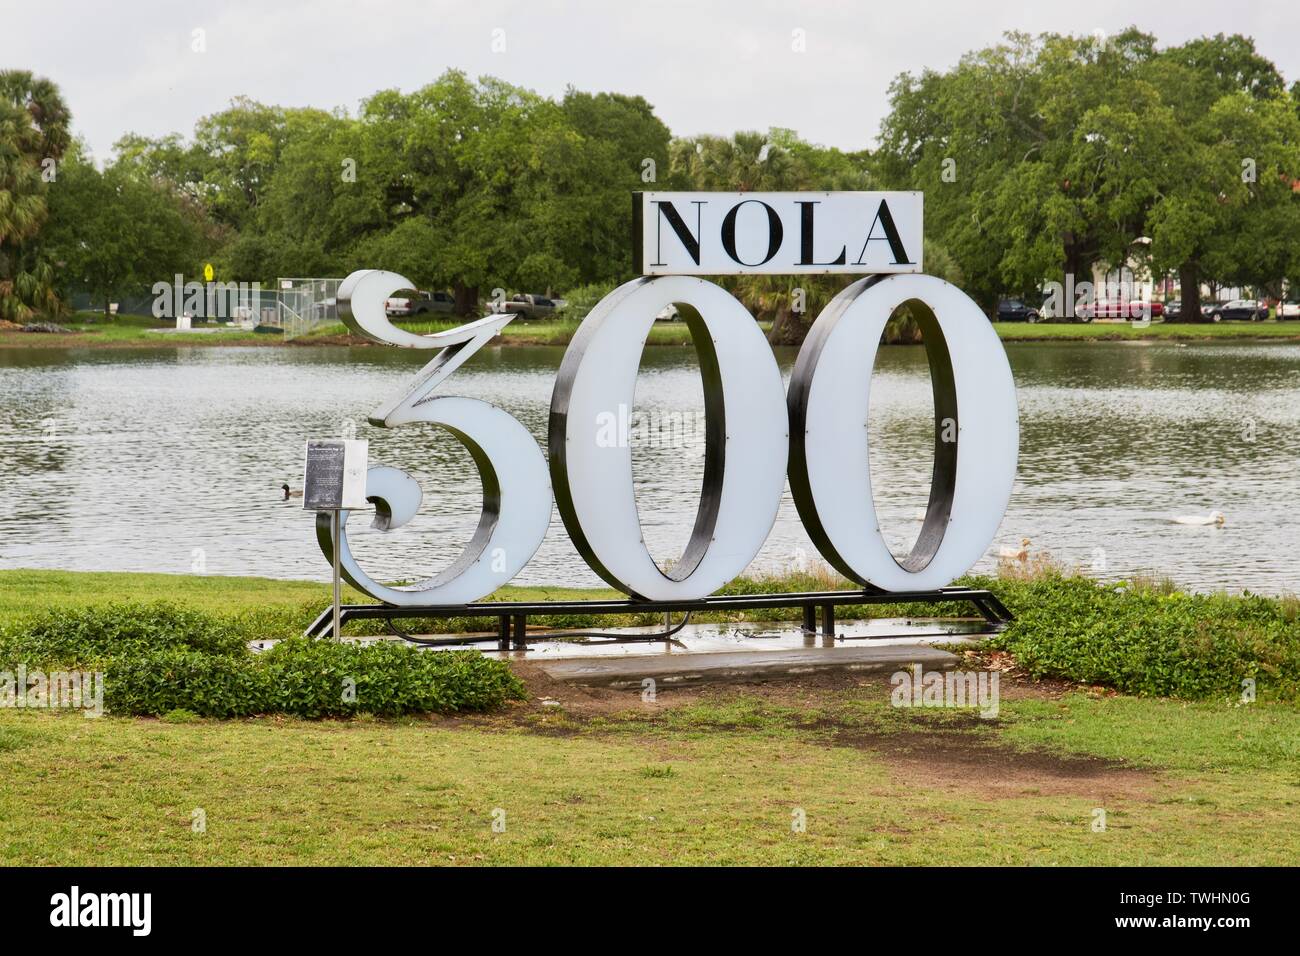 Nola 300 statue for the New Orleans tricentennial celebration in CIty Park, New Orleans Stock Photo